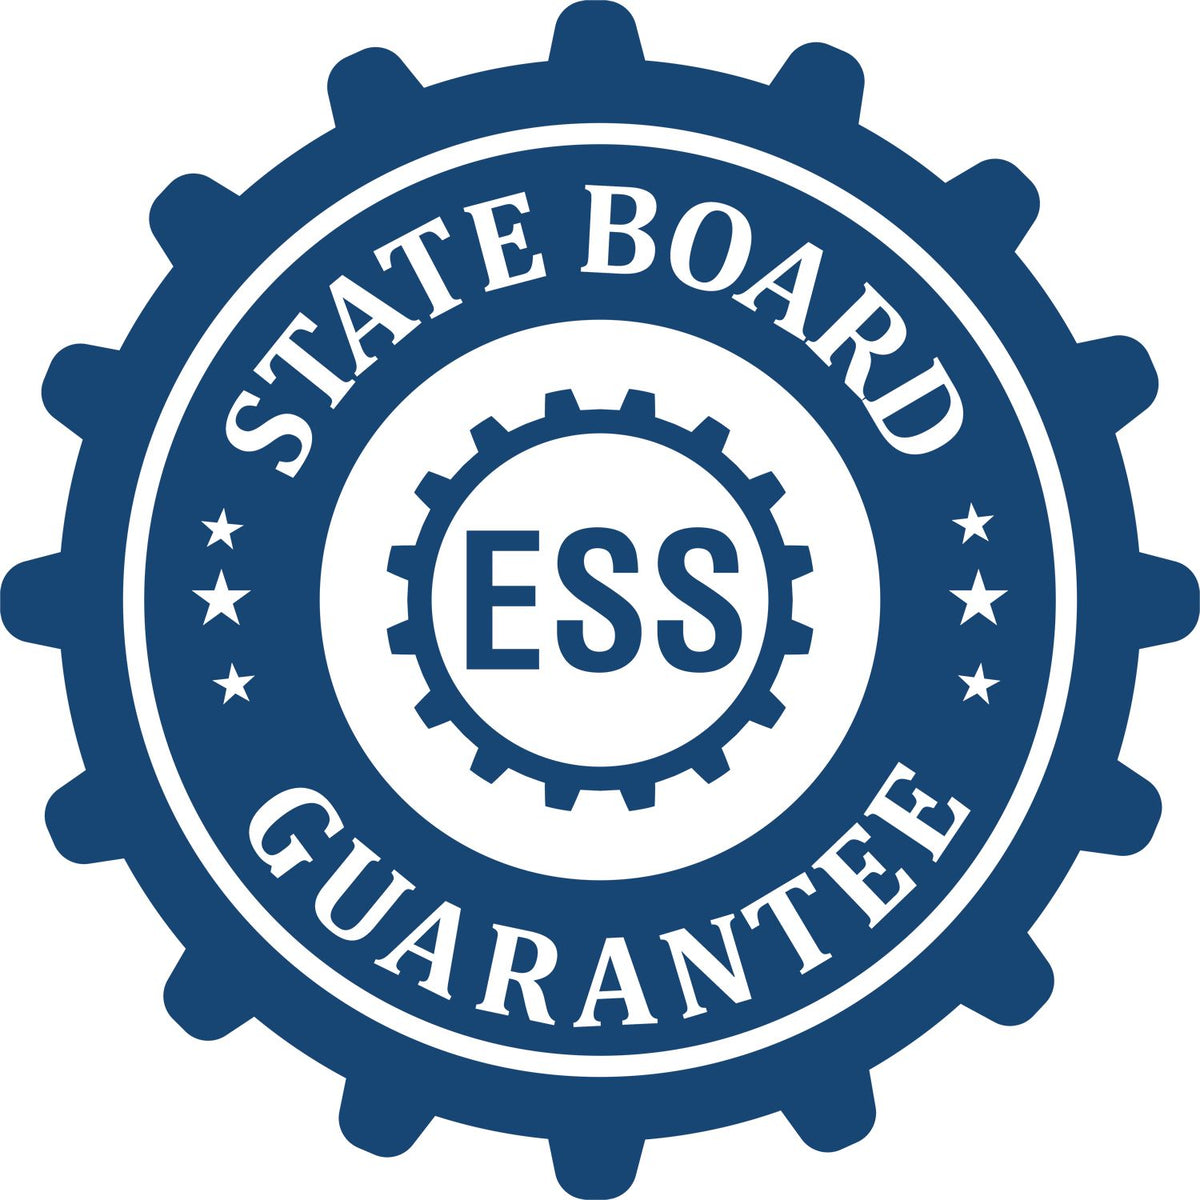 An emblem in a gear shape illustrating a state board guarantee for the Arkansas Landscape Architectural Seal Stamp product.